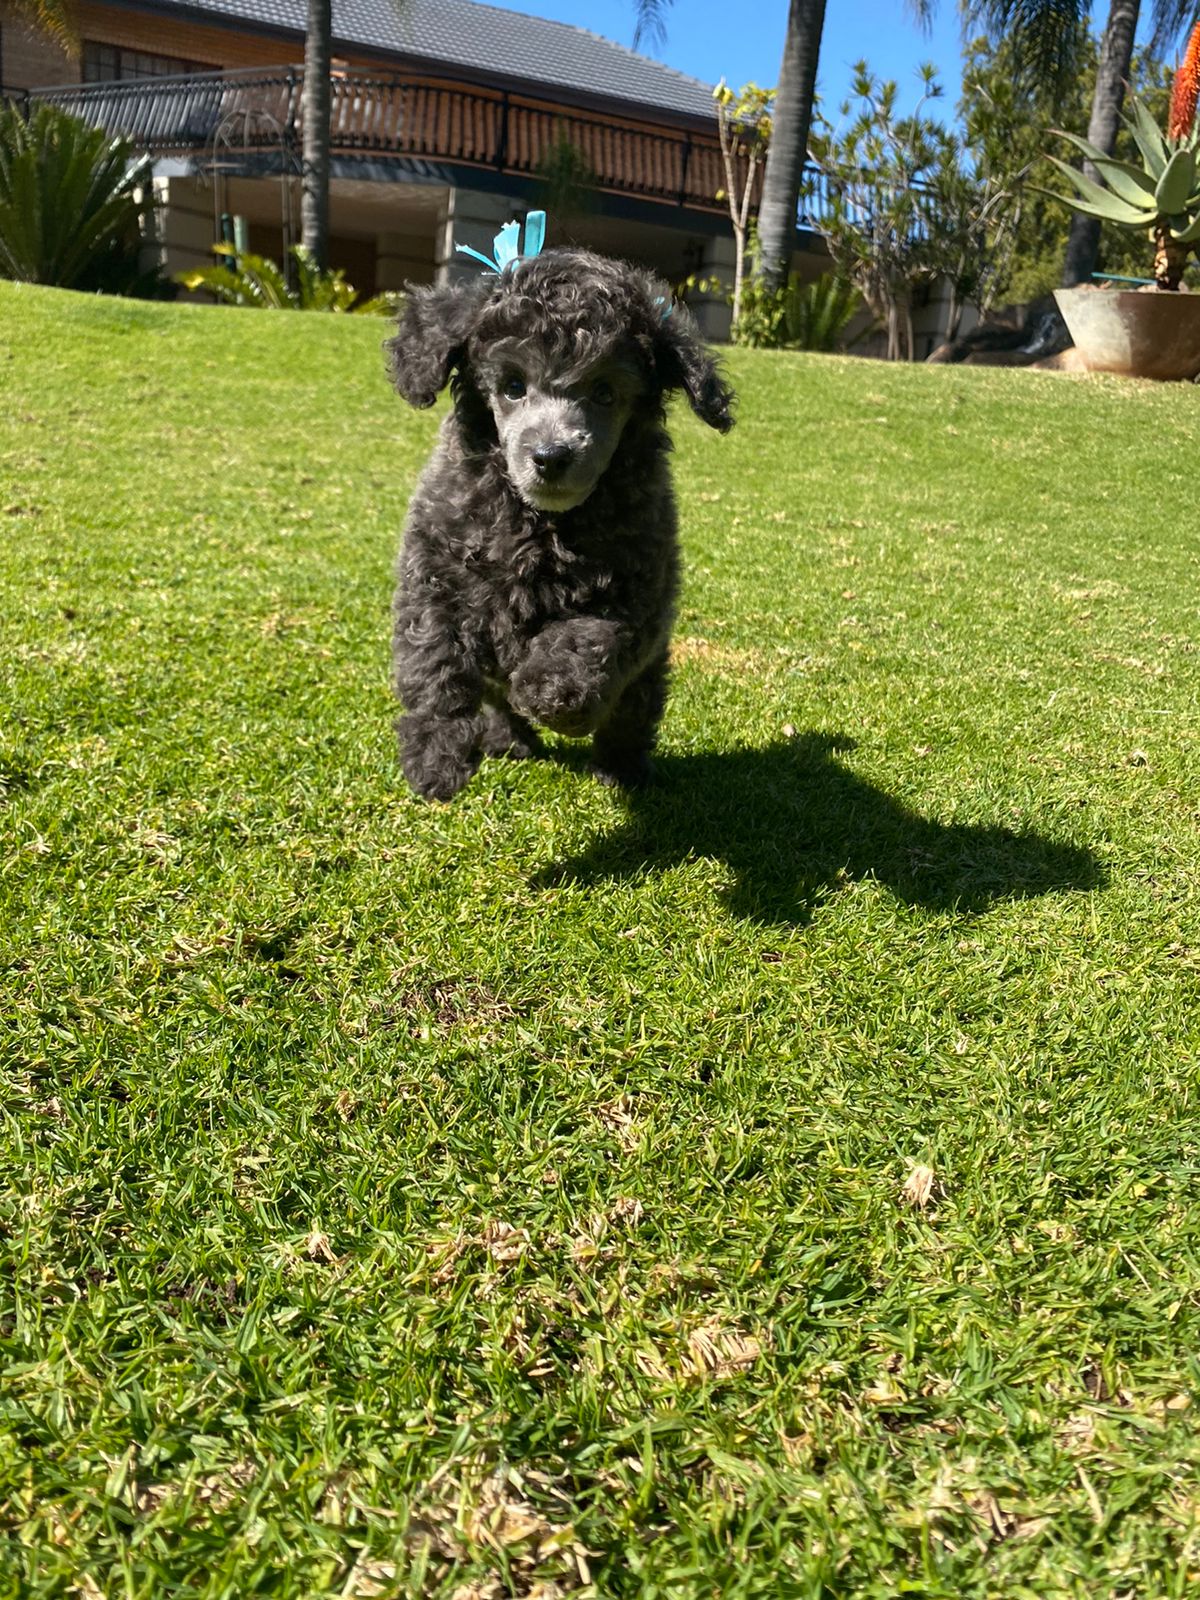 French Poodle Puppy for Sale, Male, Grey , Minature